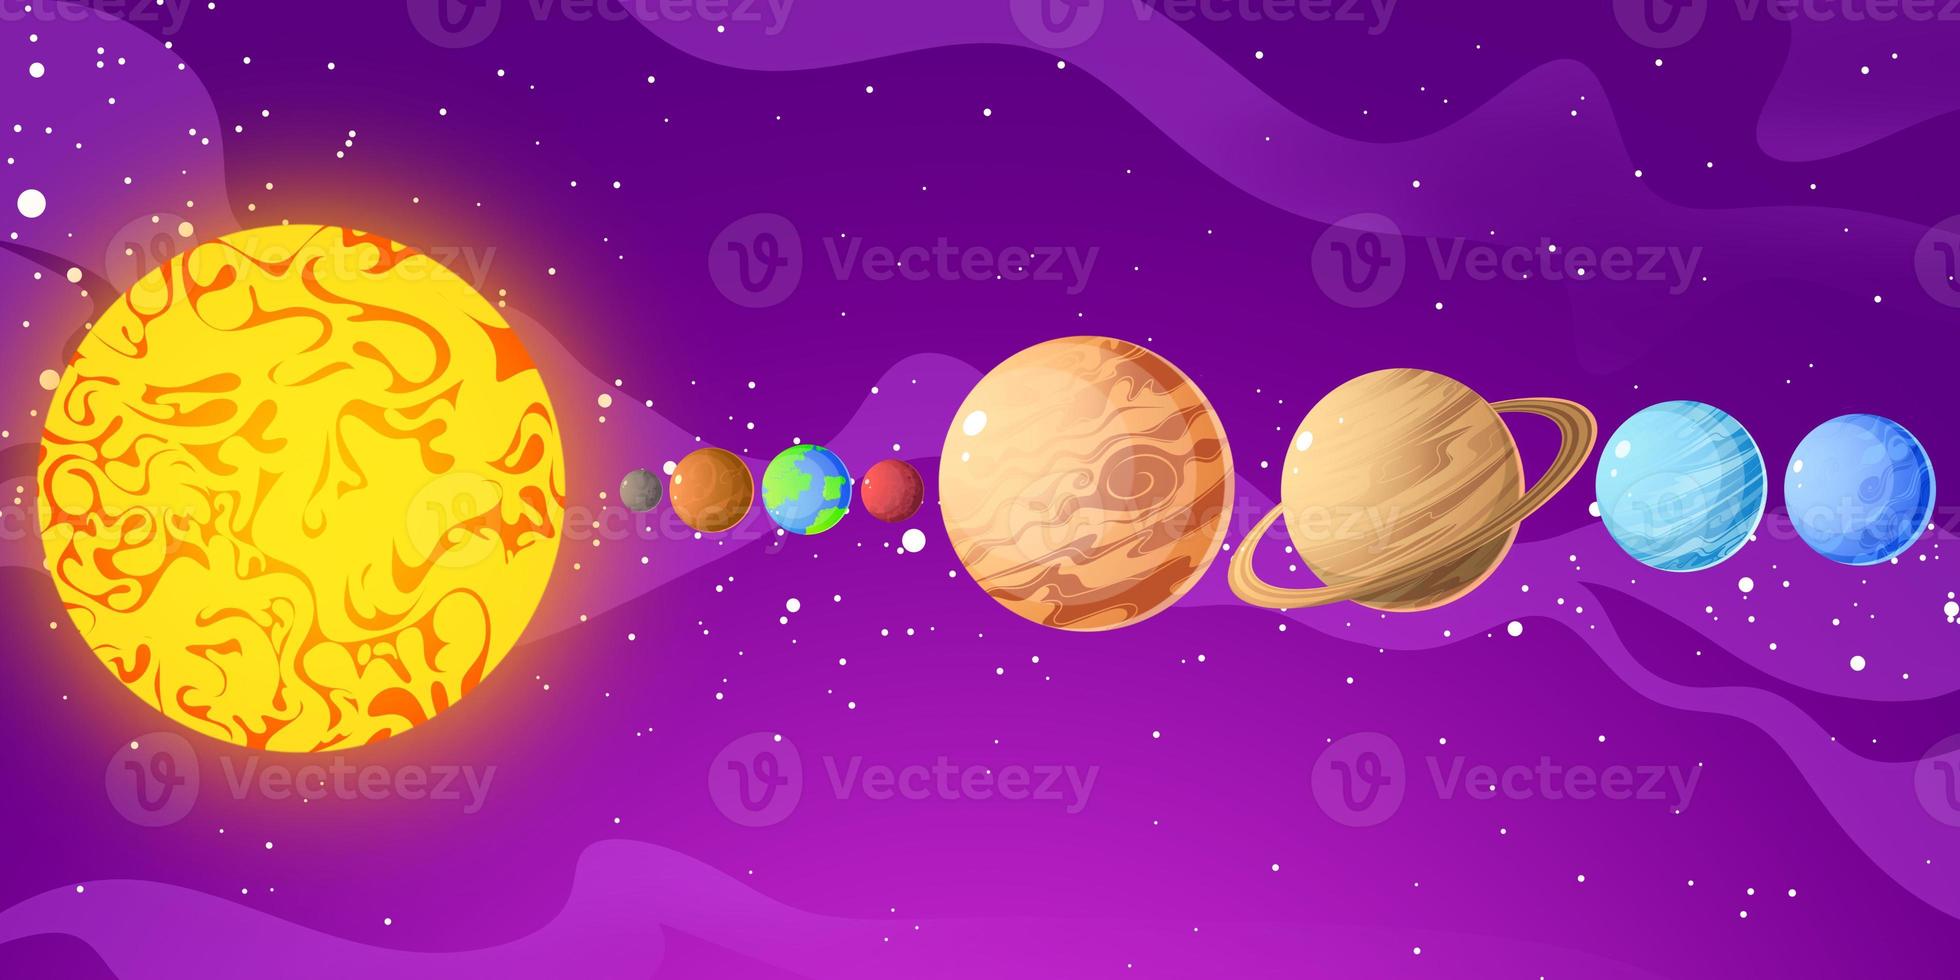 solar system illustration. Each star has its own solar system with different planets photo